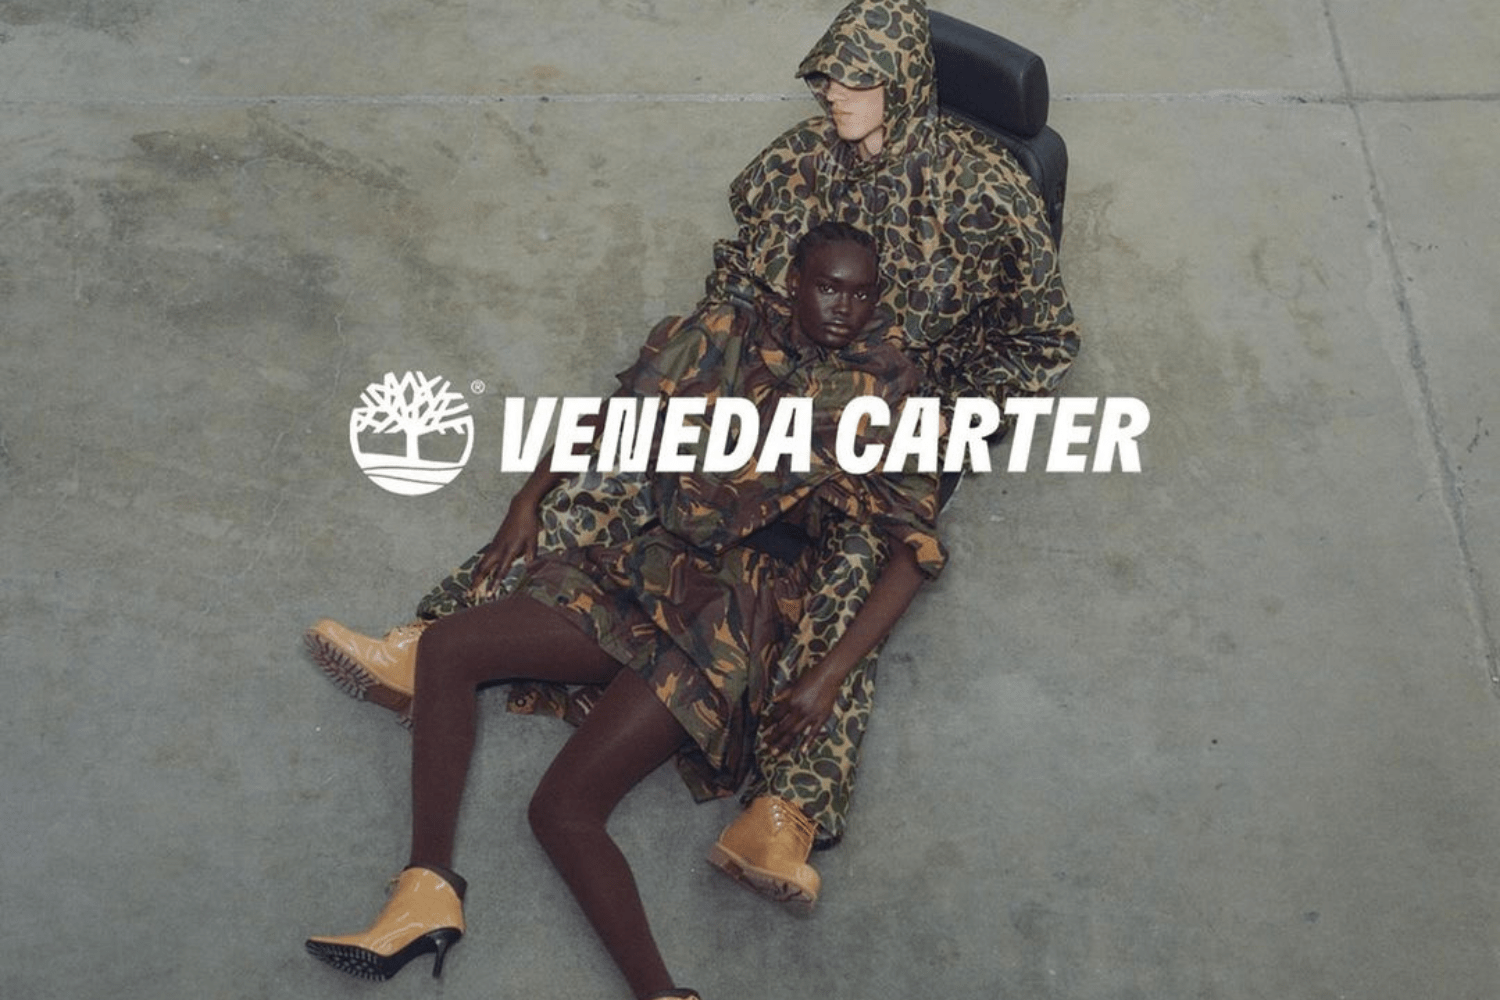 Veneda Carter arrives with waterproof Timbs in Timberland collab